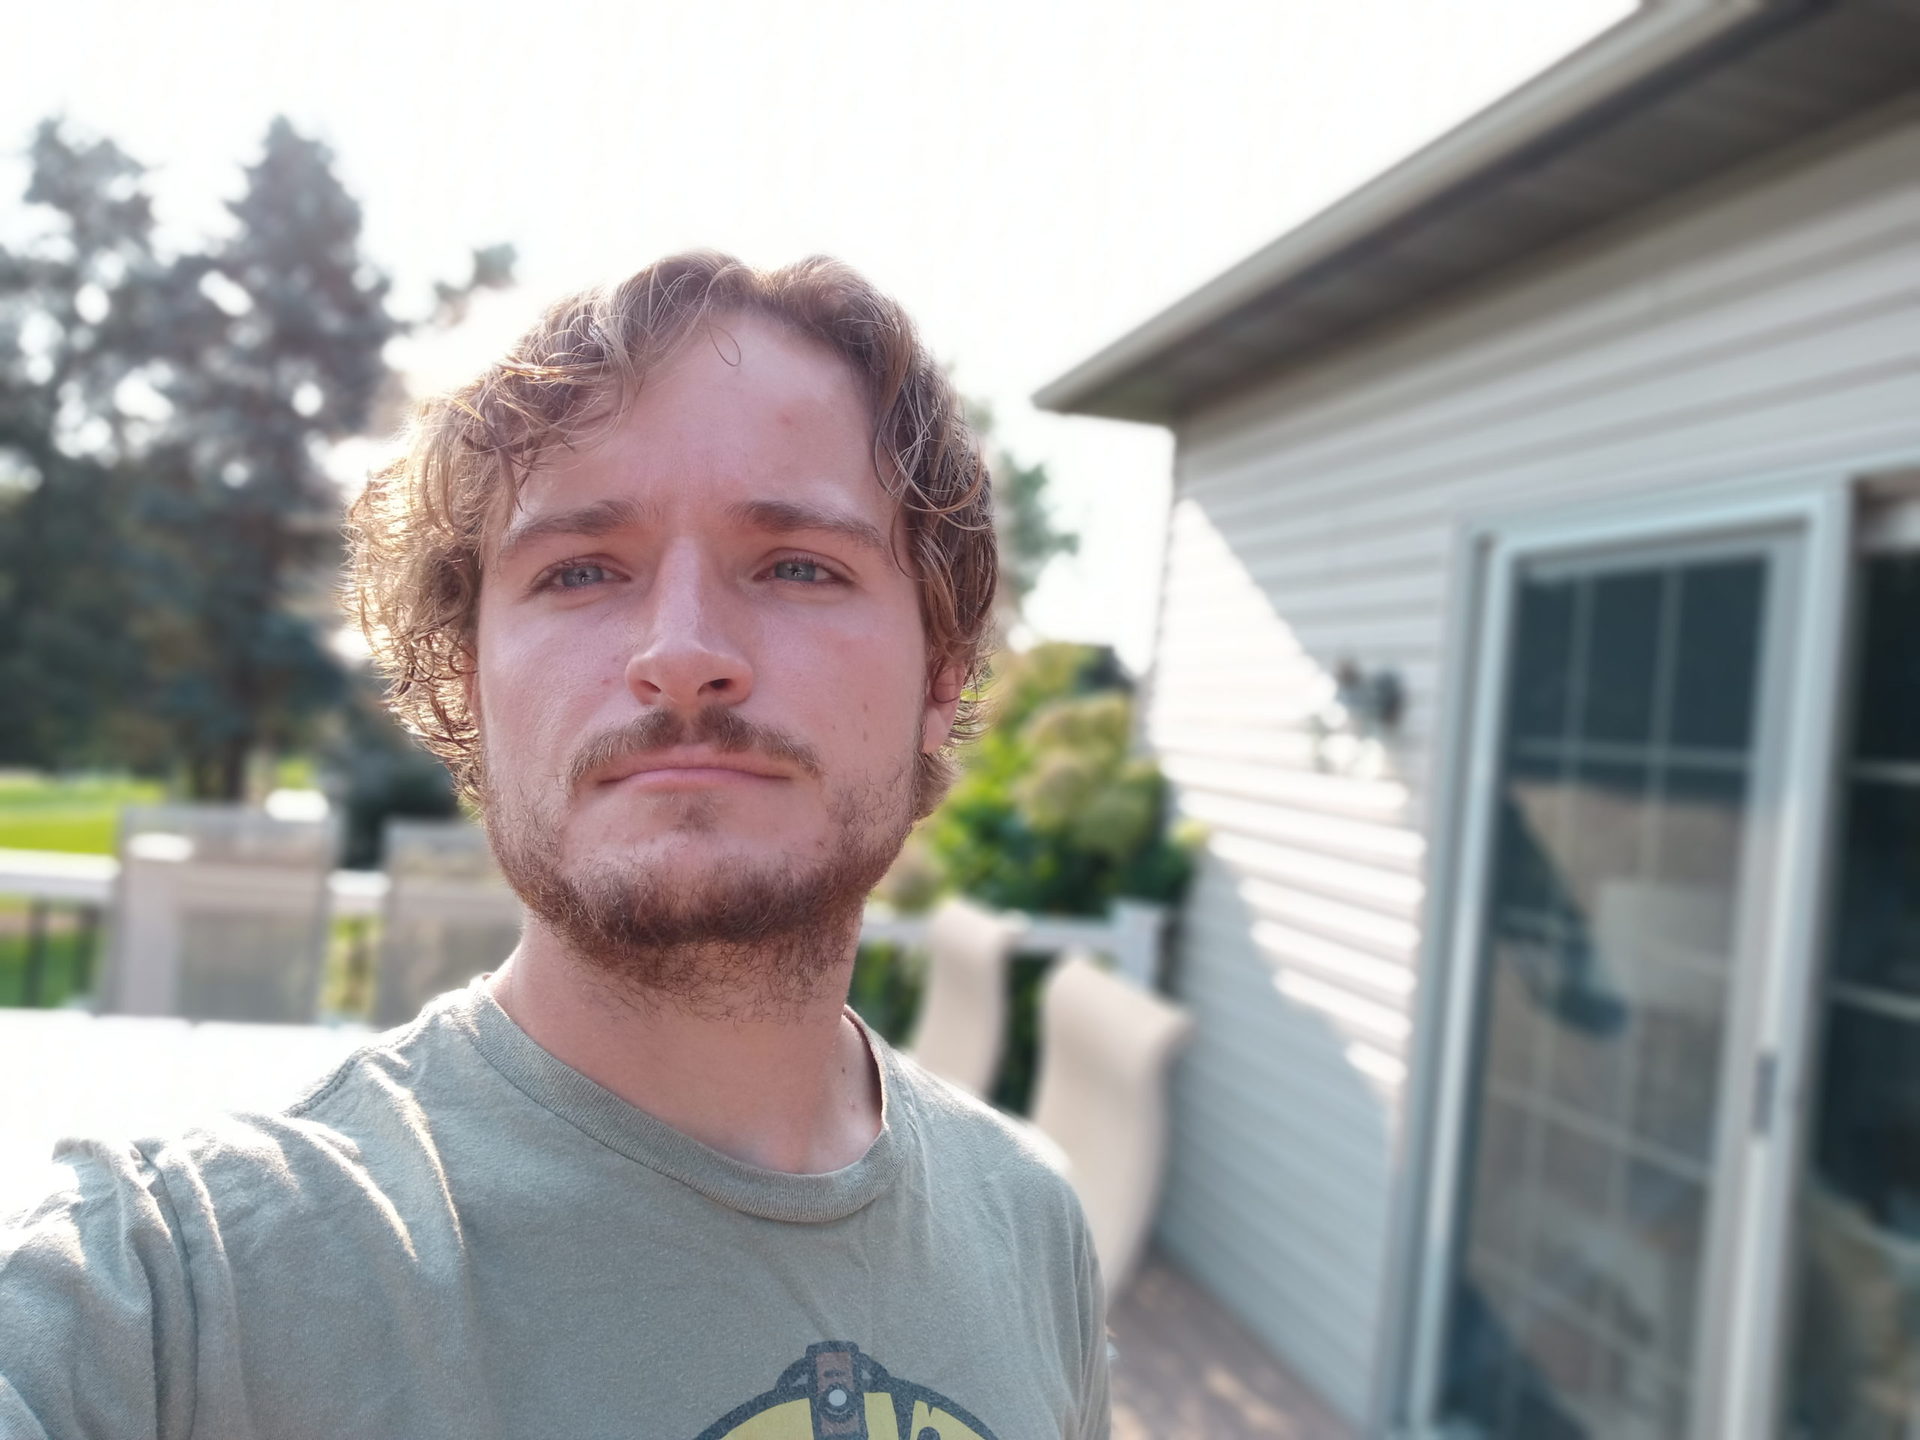 A portrait selfie taken with the LG Reflect of a man with light hair and facial hair wearing a grey t-shirt, taken outdoors.